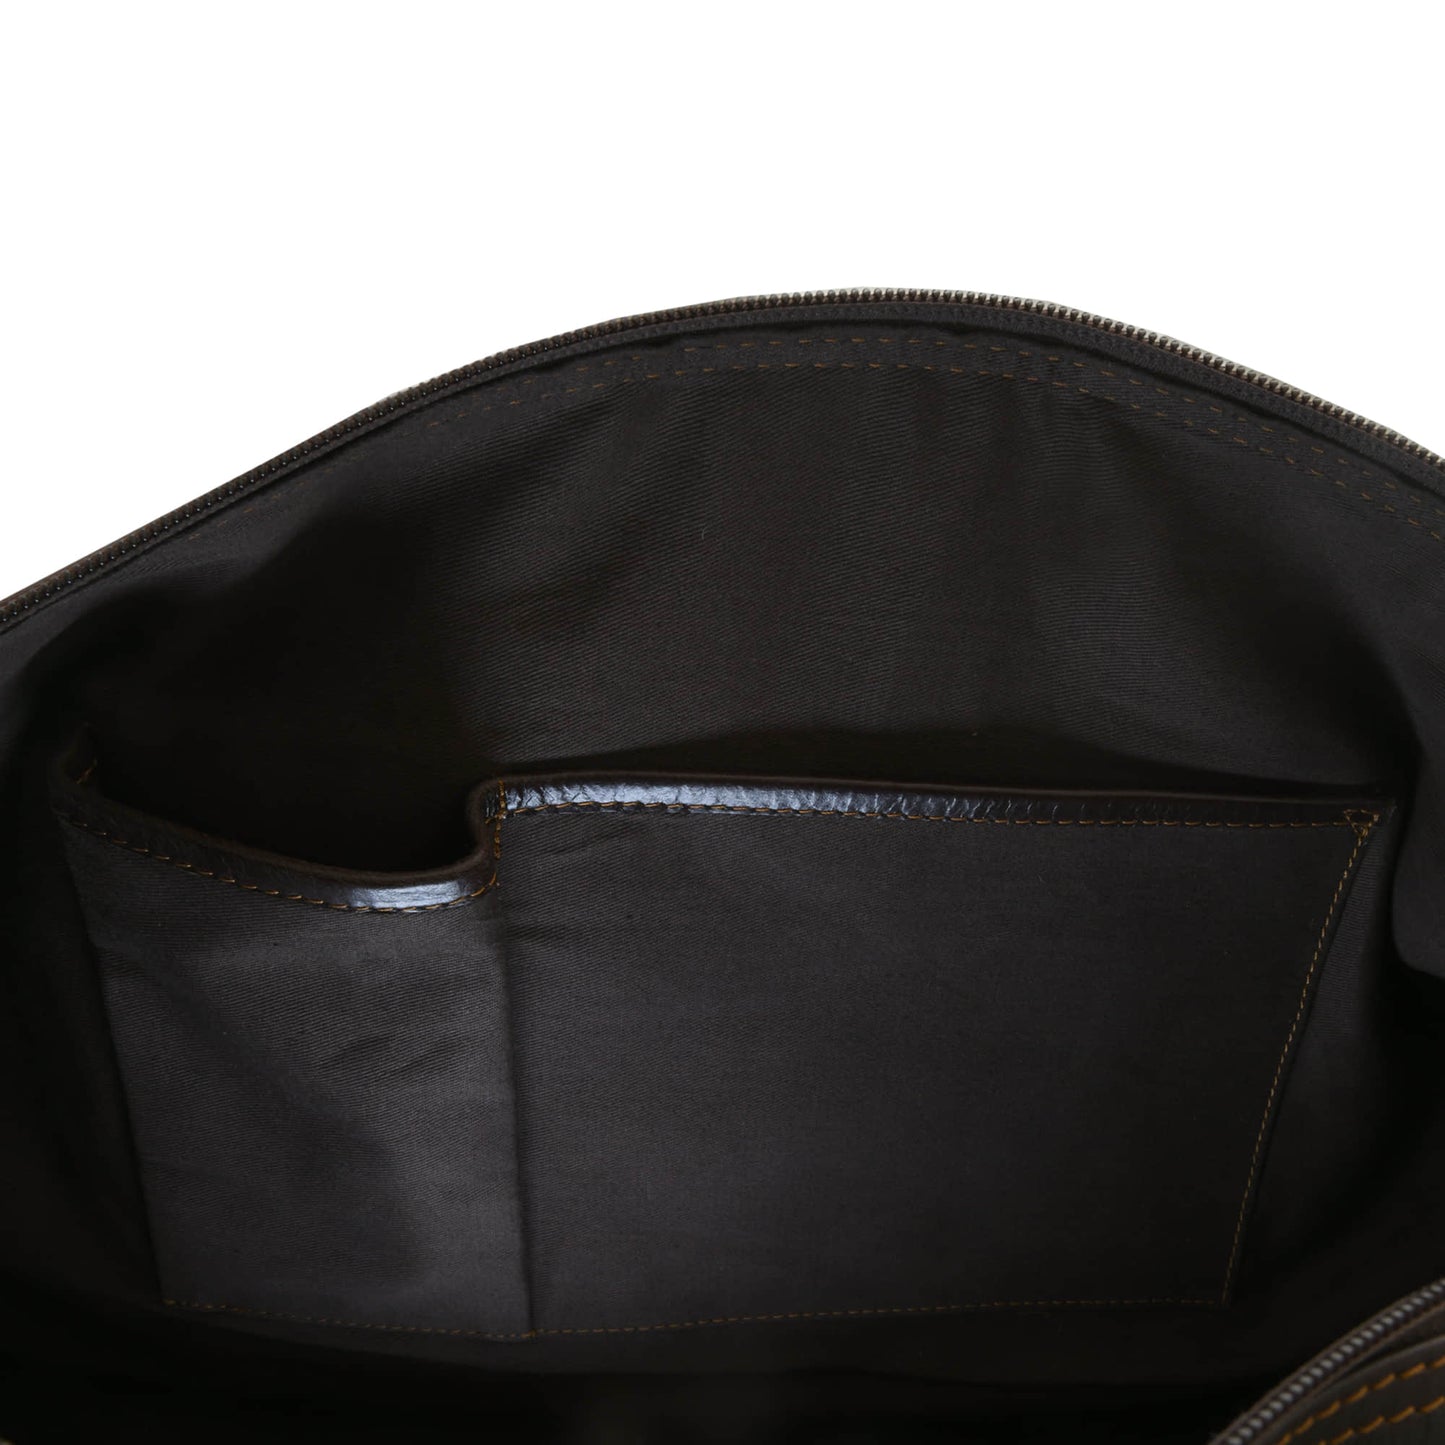 Style n Craft 392101 Duffle Bag in Full Grain Dark Brown Leather - View of the Inside Open Pockets